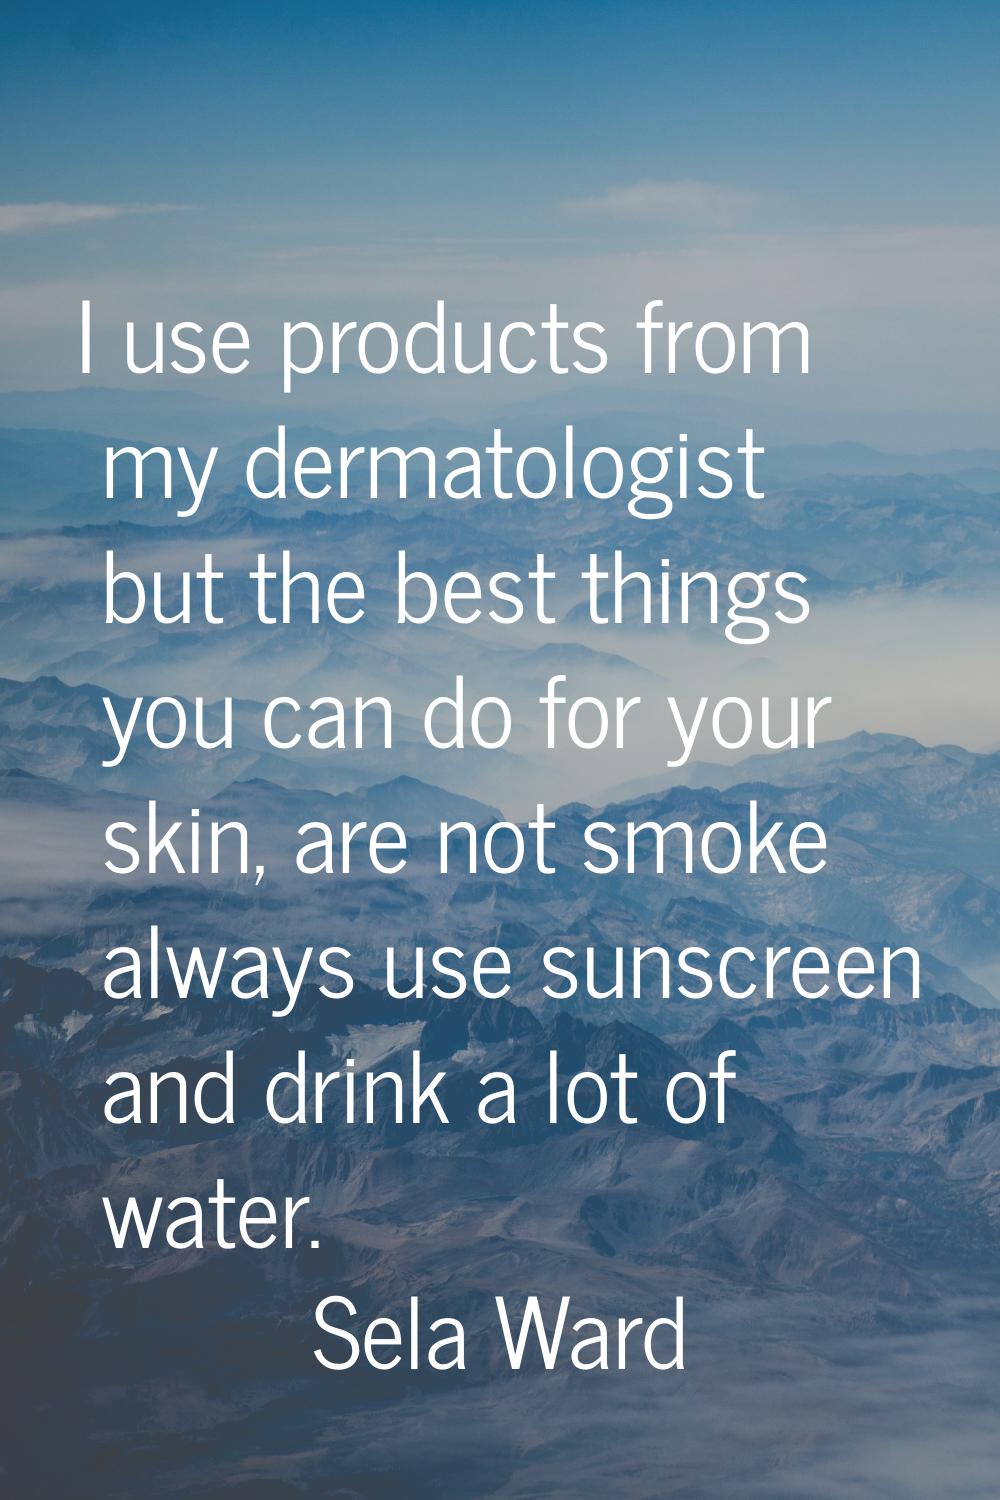 I use products from my dermatologist but the best things you can do for your skin, are not smoke al